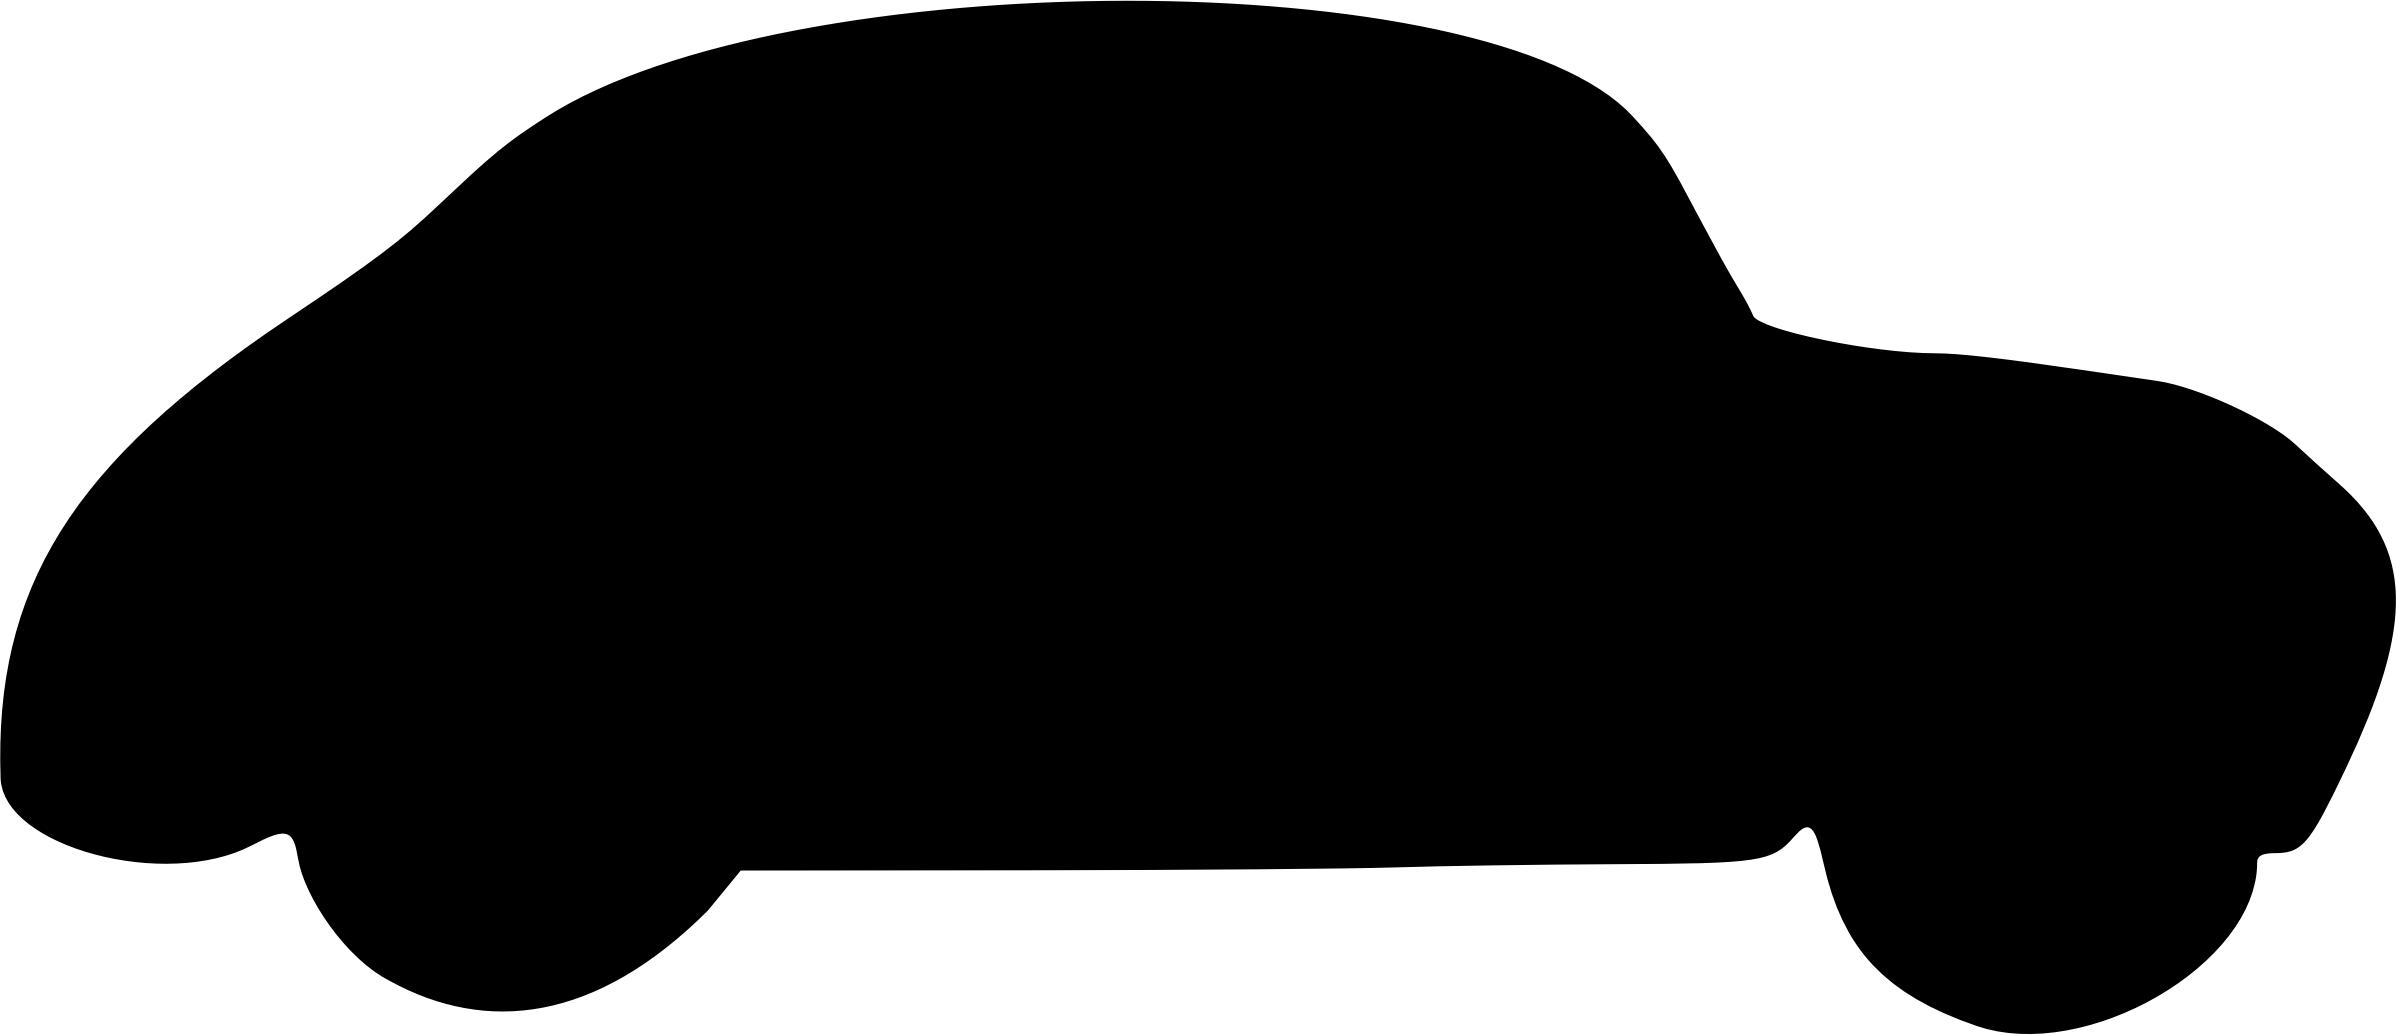 Car silhouette 4 png